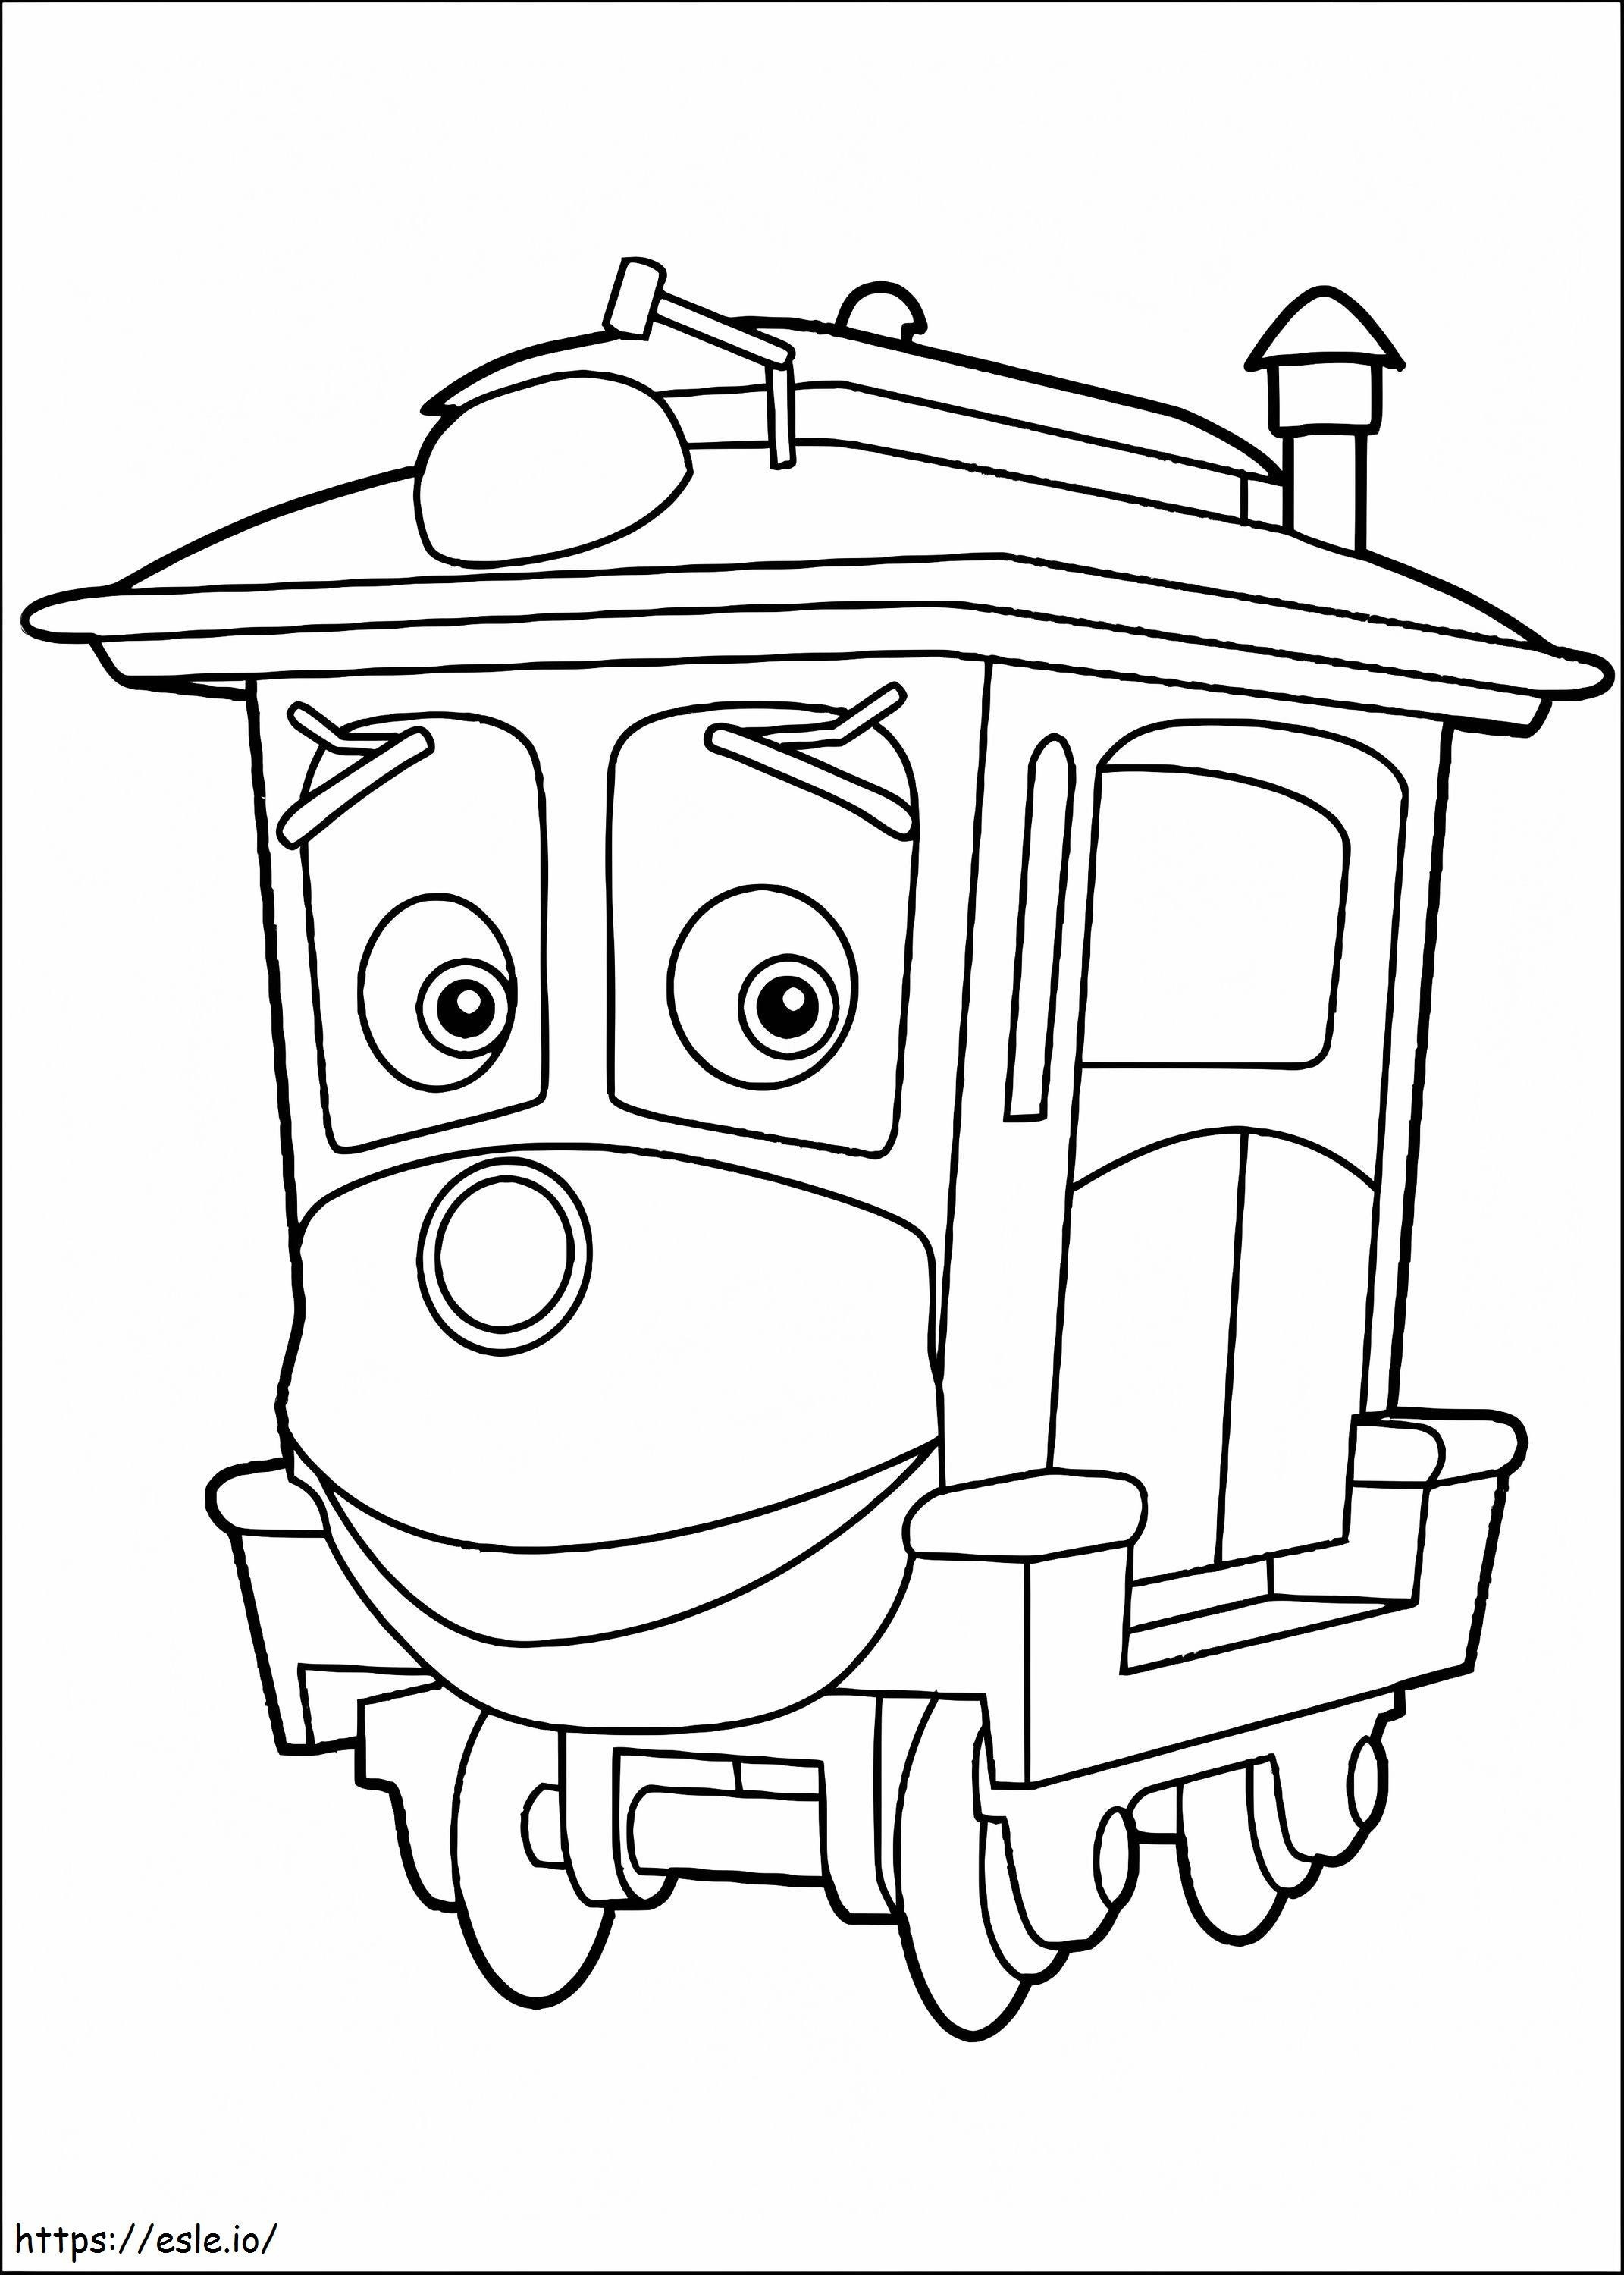 Zephie In Chuggington coloring page